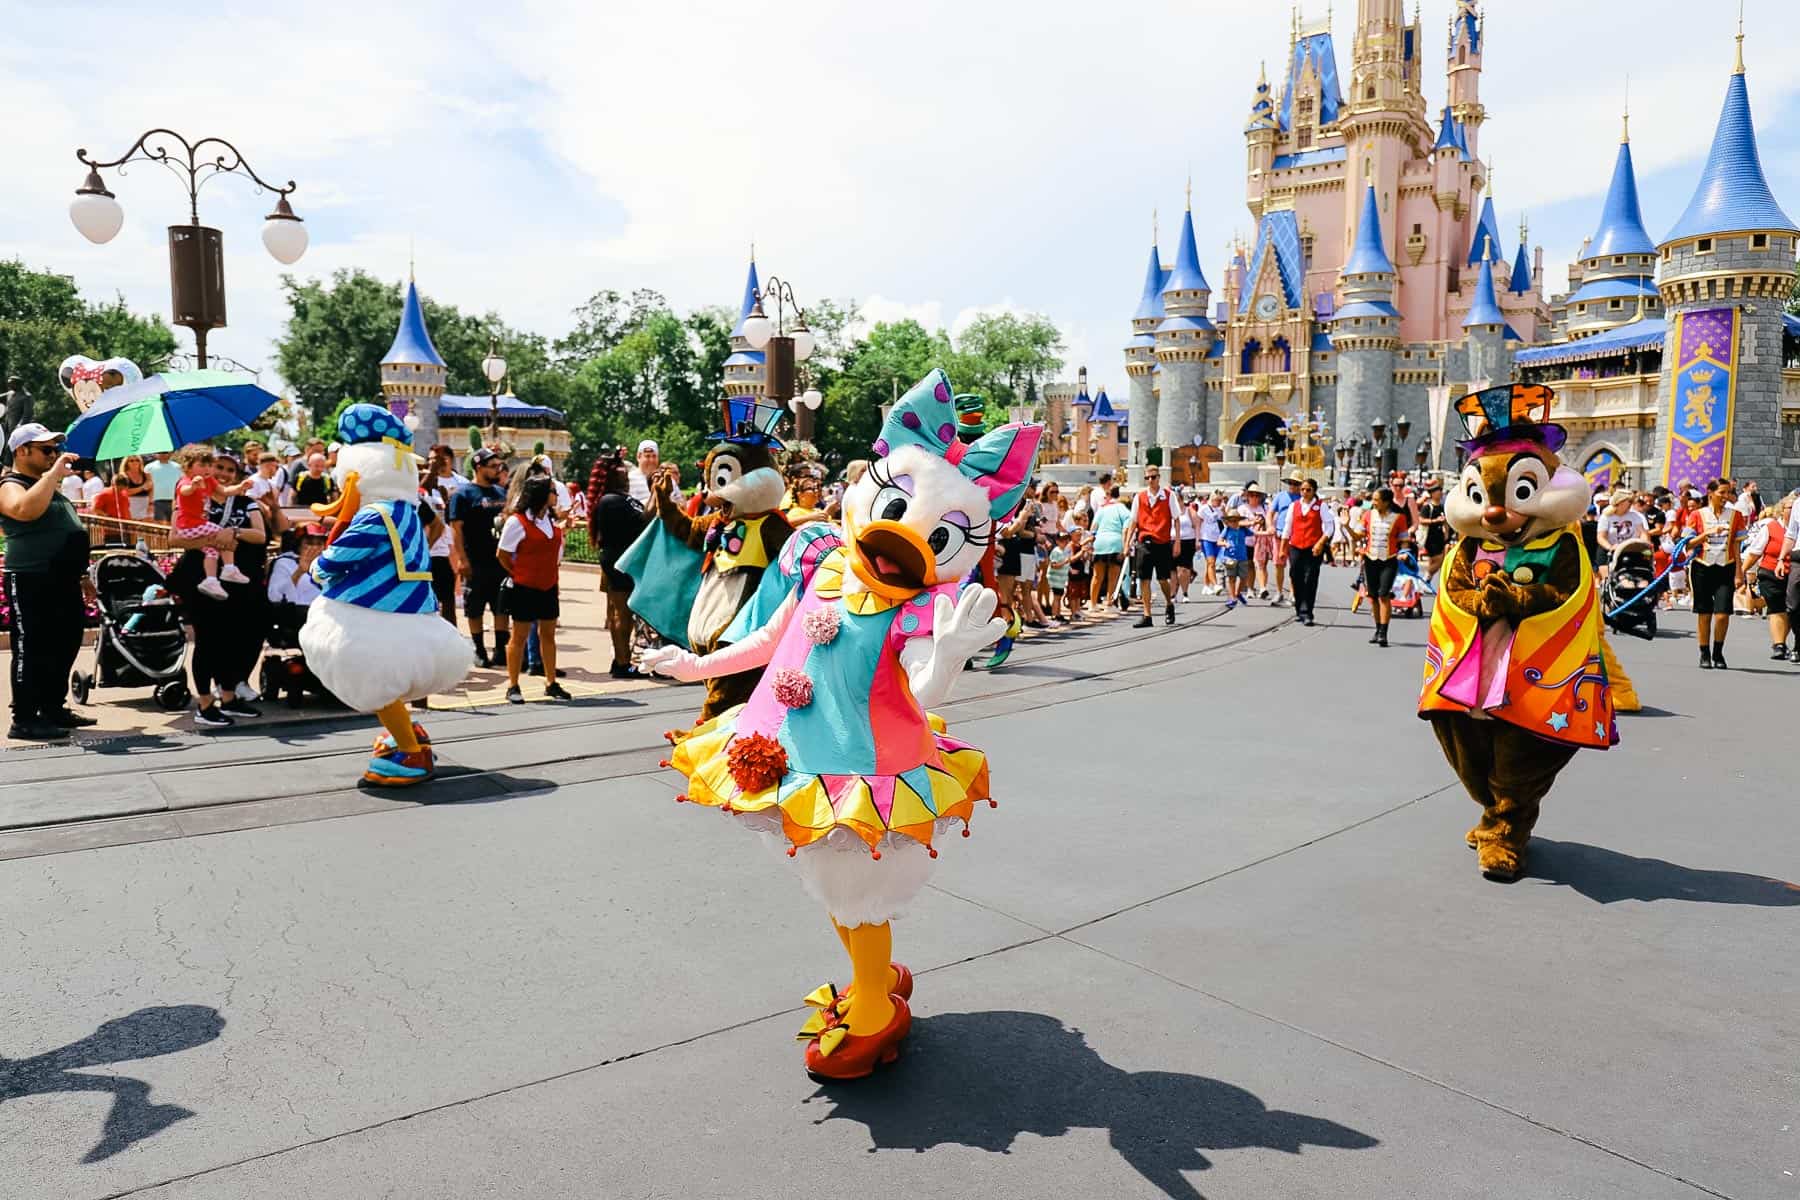 Daisy, Donald, Chip and Dale as walking performers during the Magic Kingdom parade. 